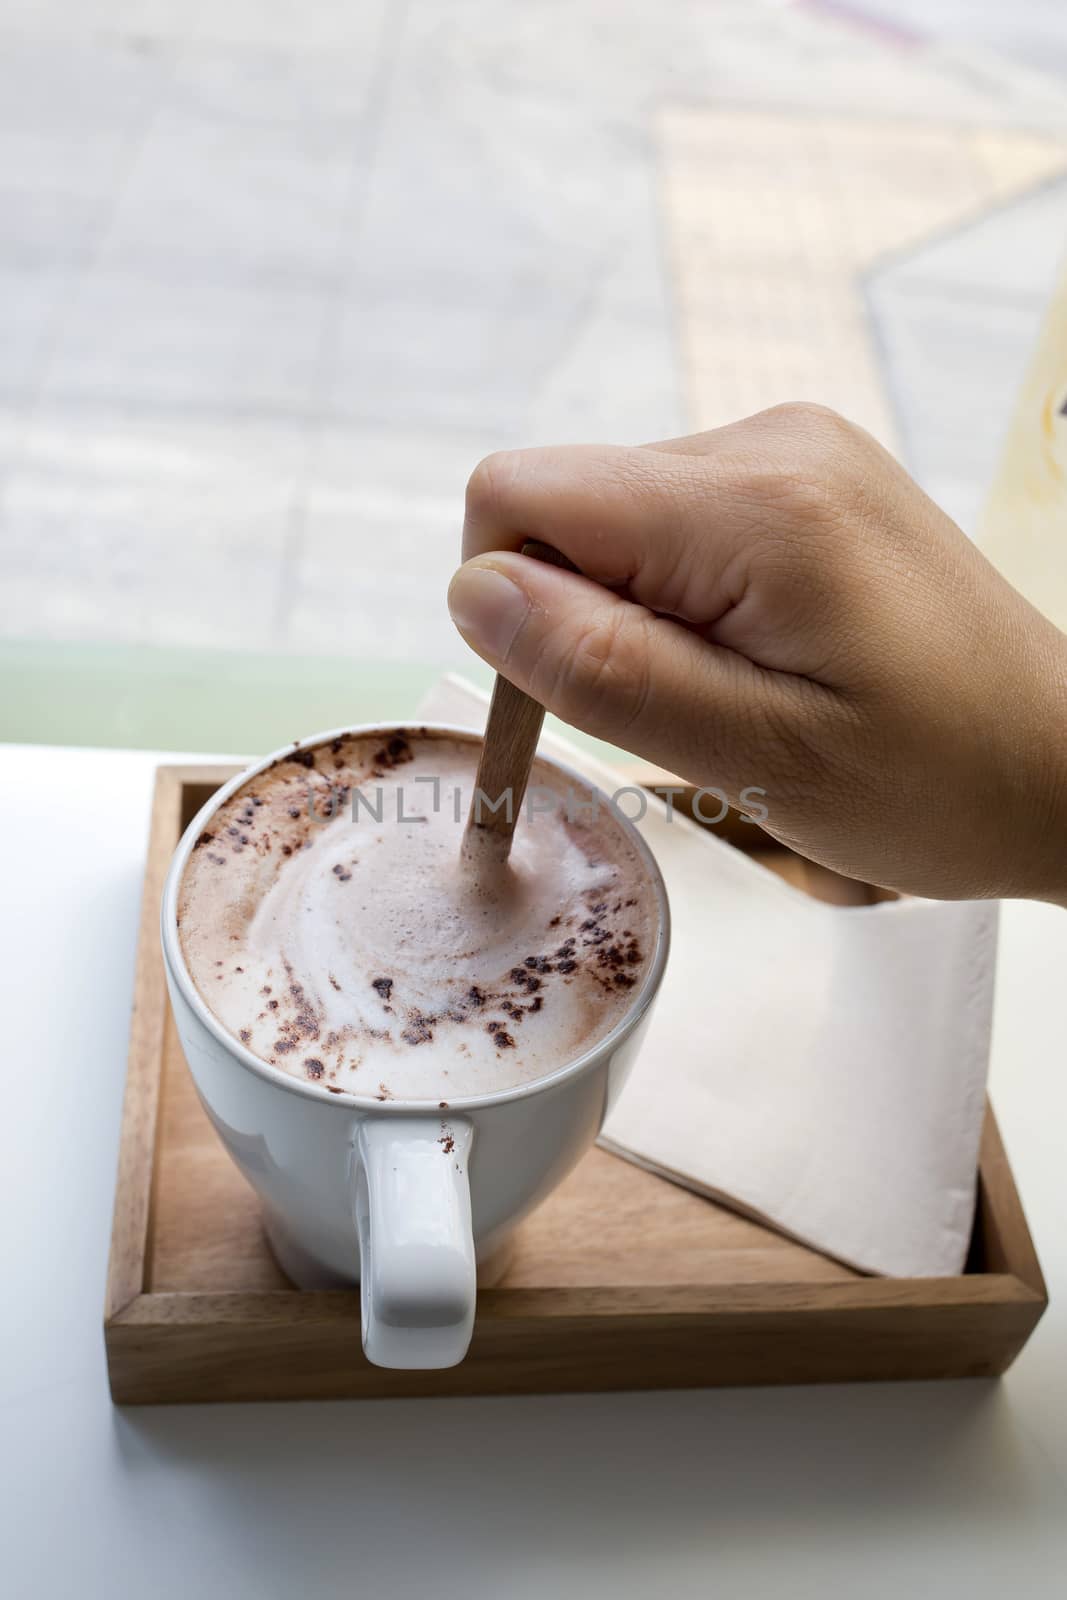 Human hand stir hot chocolate in cafe by art9858